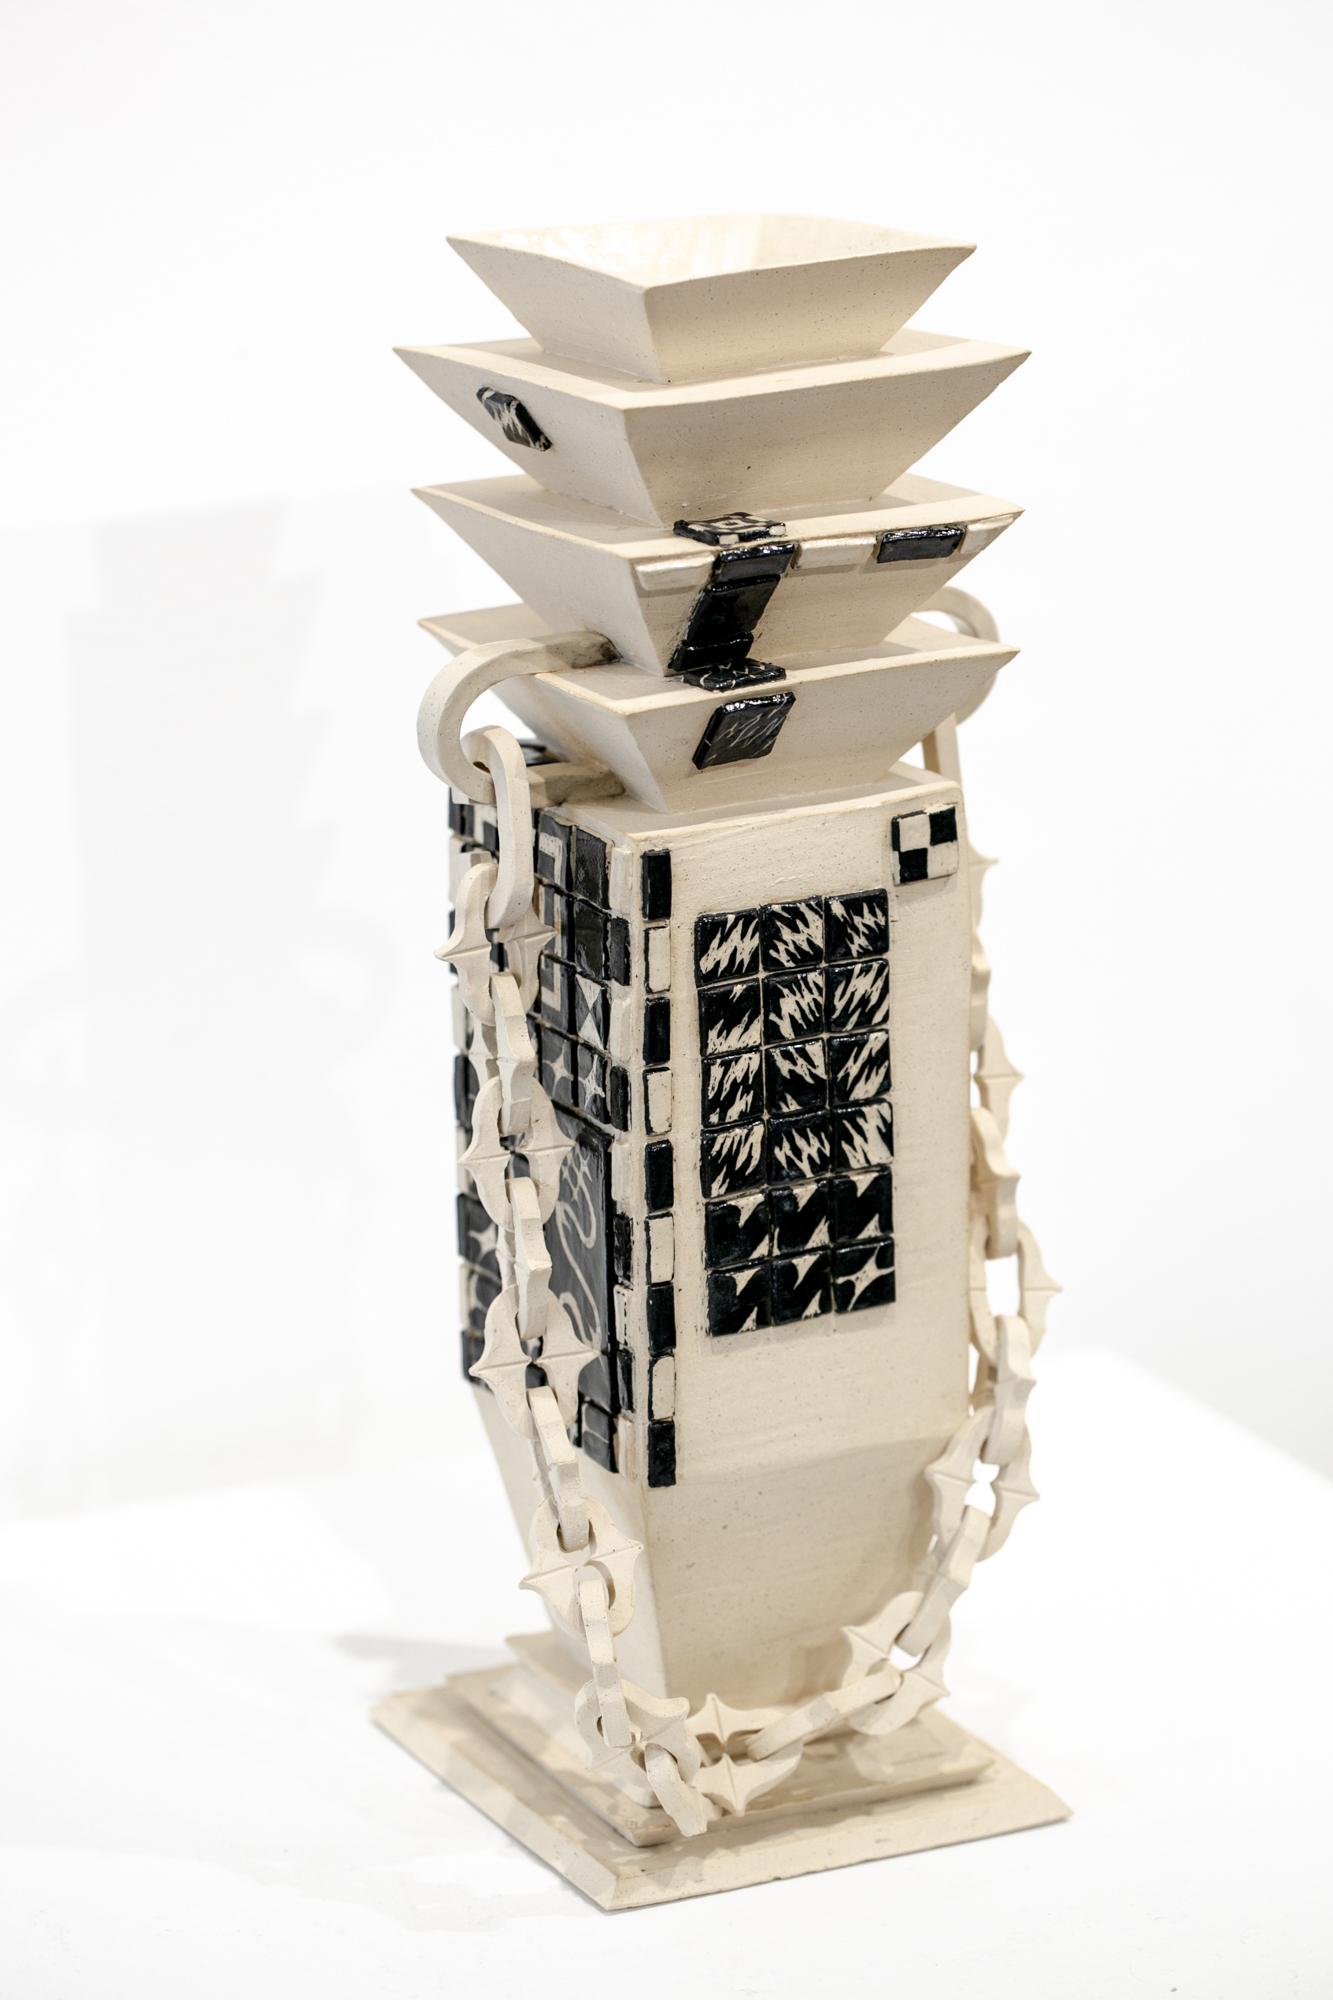 Aged Tiled Monolith - Contemporary Sculpture by Alex Kovacs